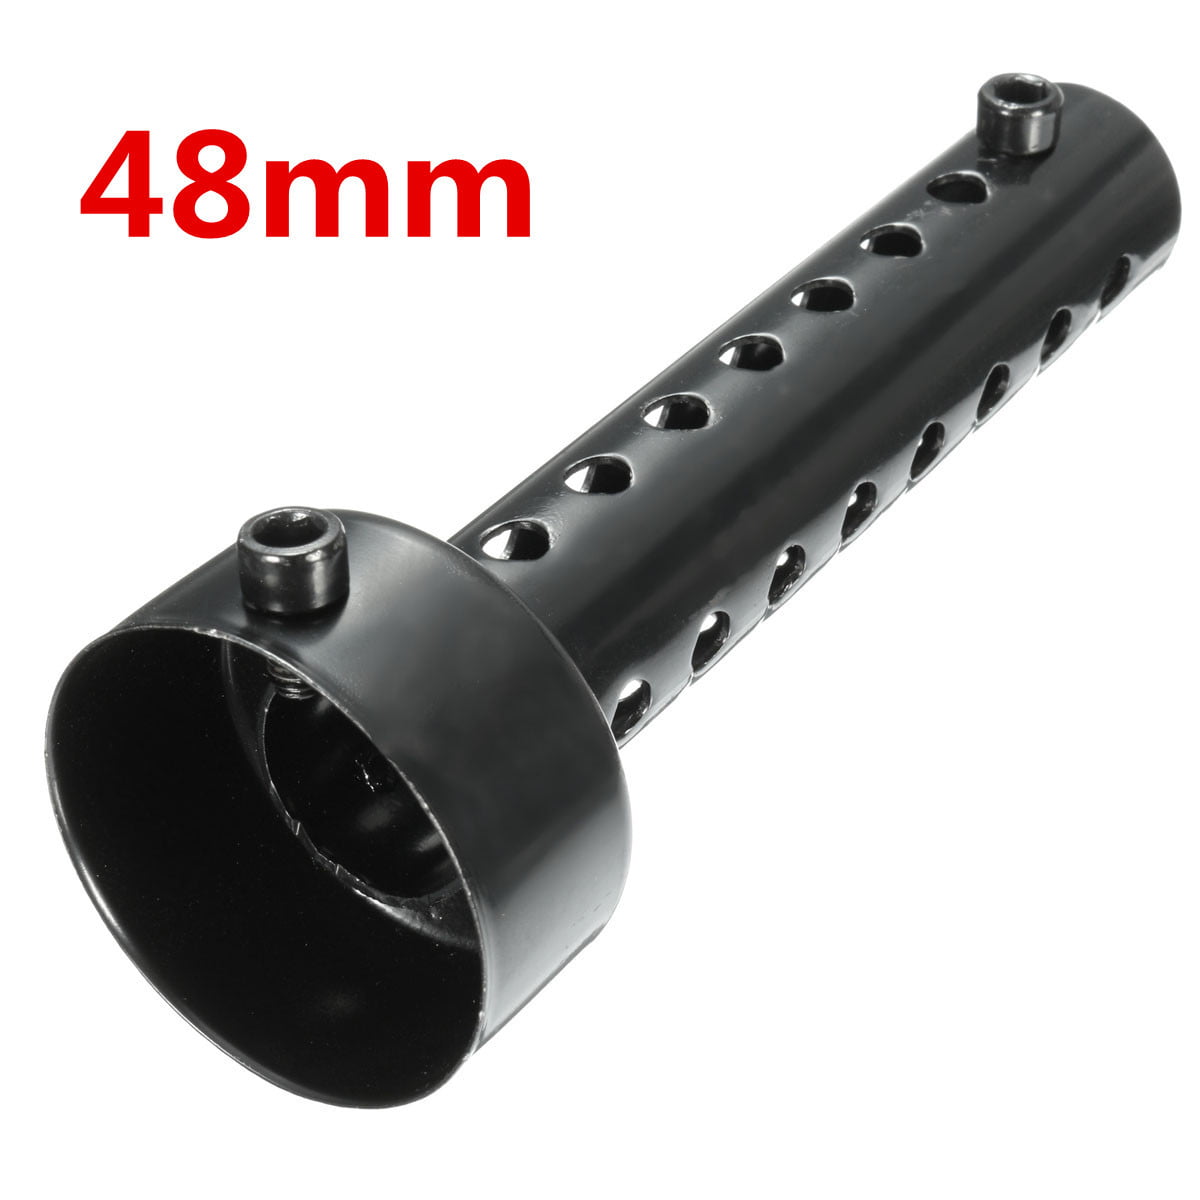 4 51mm Universal Motorcycle Exhaust Pipe Muffler Silencer Insert DB Killer Noise Eliminator Motorcycle Modification Accessory Qiilu Exhaust Pipe Muffler